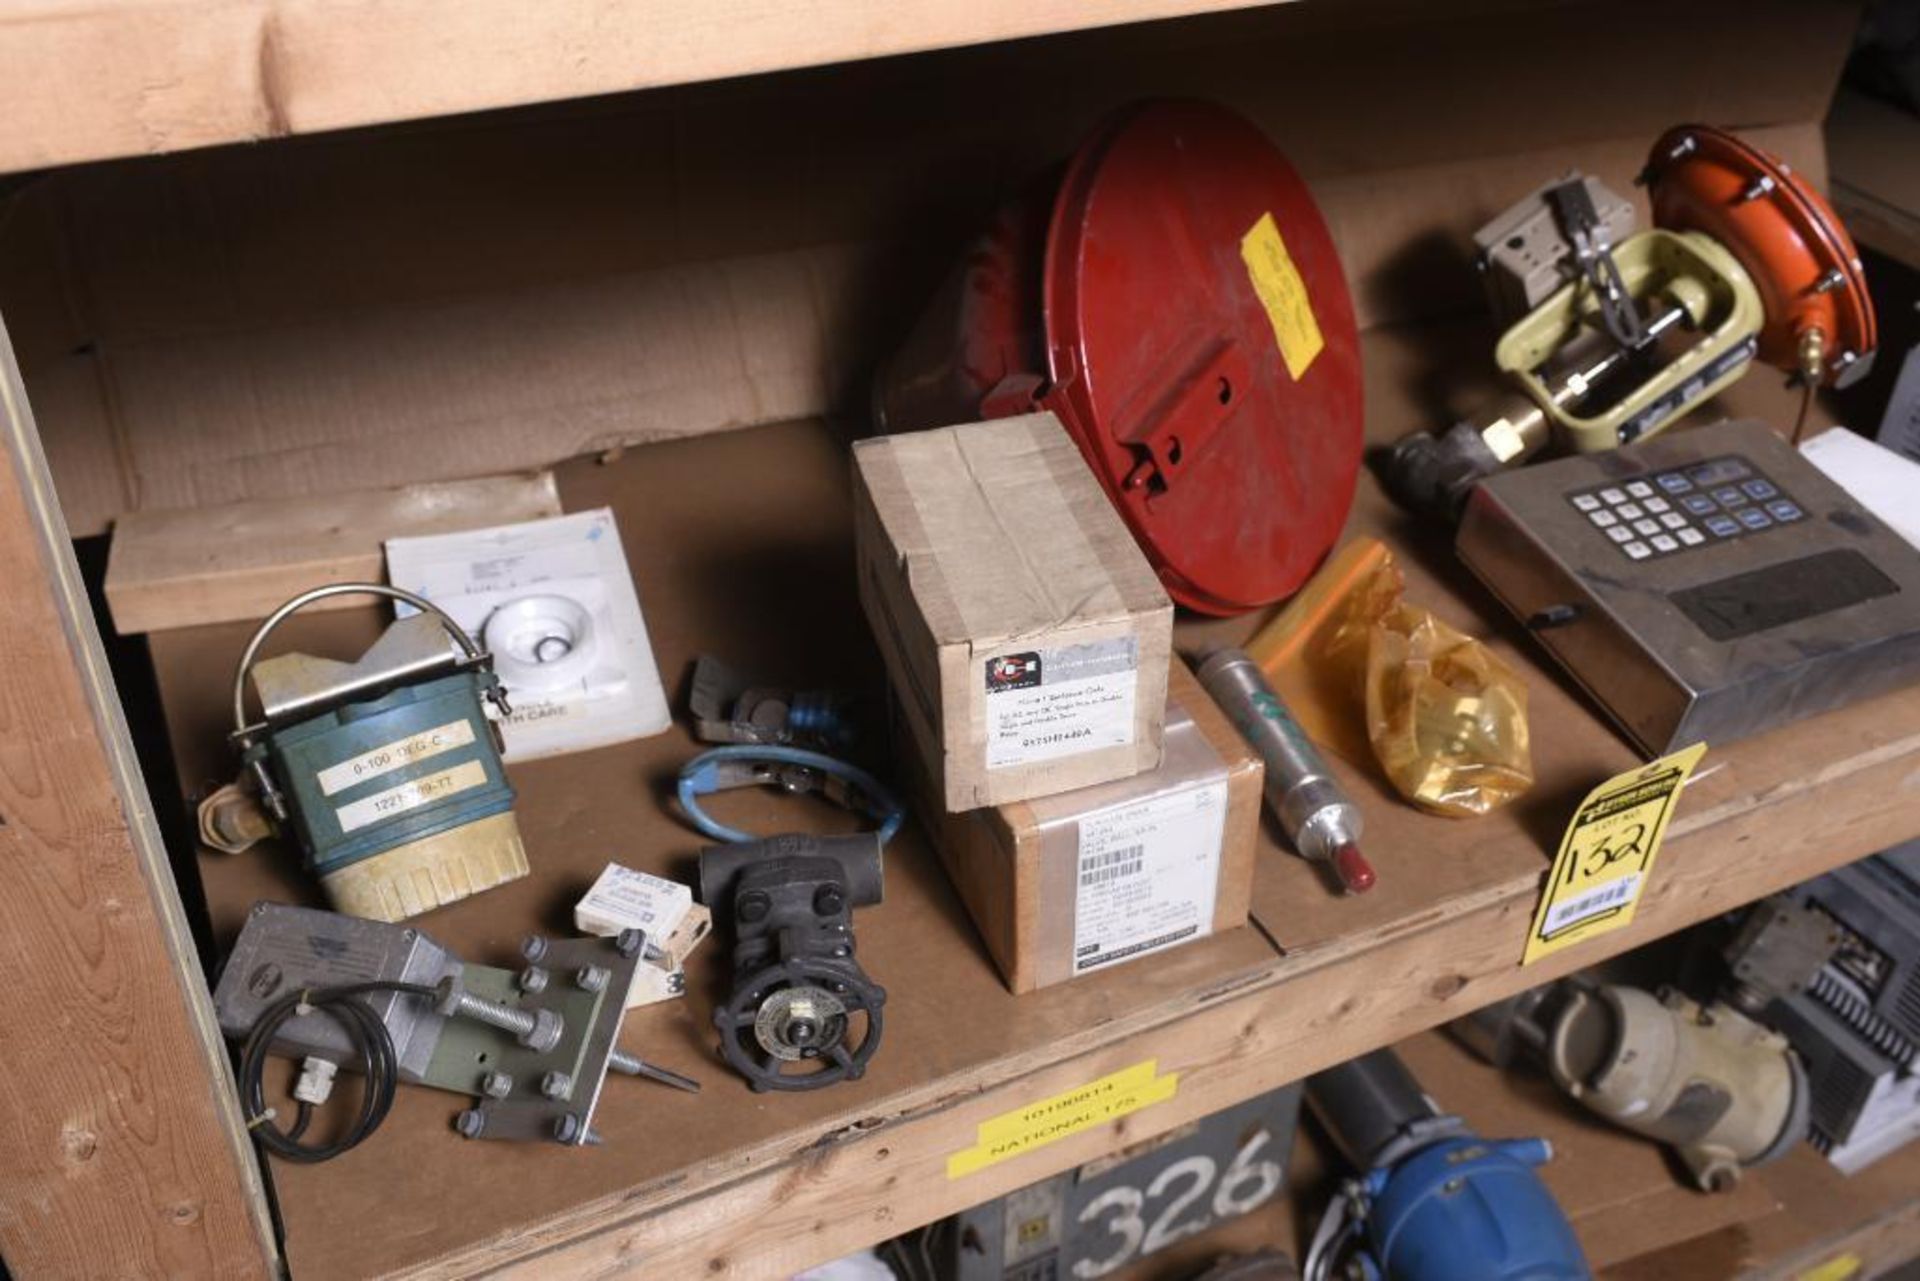 Shelf of Miscellaneous MRO; Valves & Electrical (Cutler Hammer, Endress Hauser, Reliance Electric) - Image 2 of 3